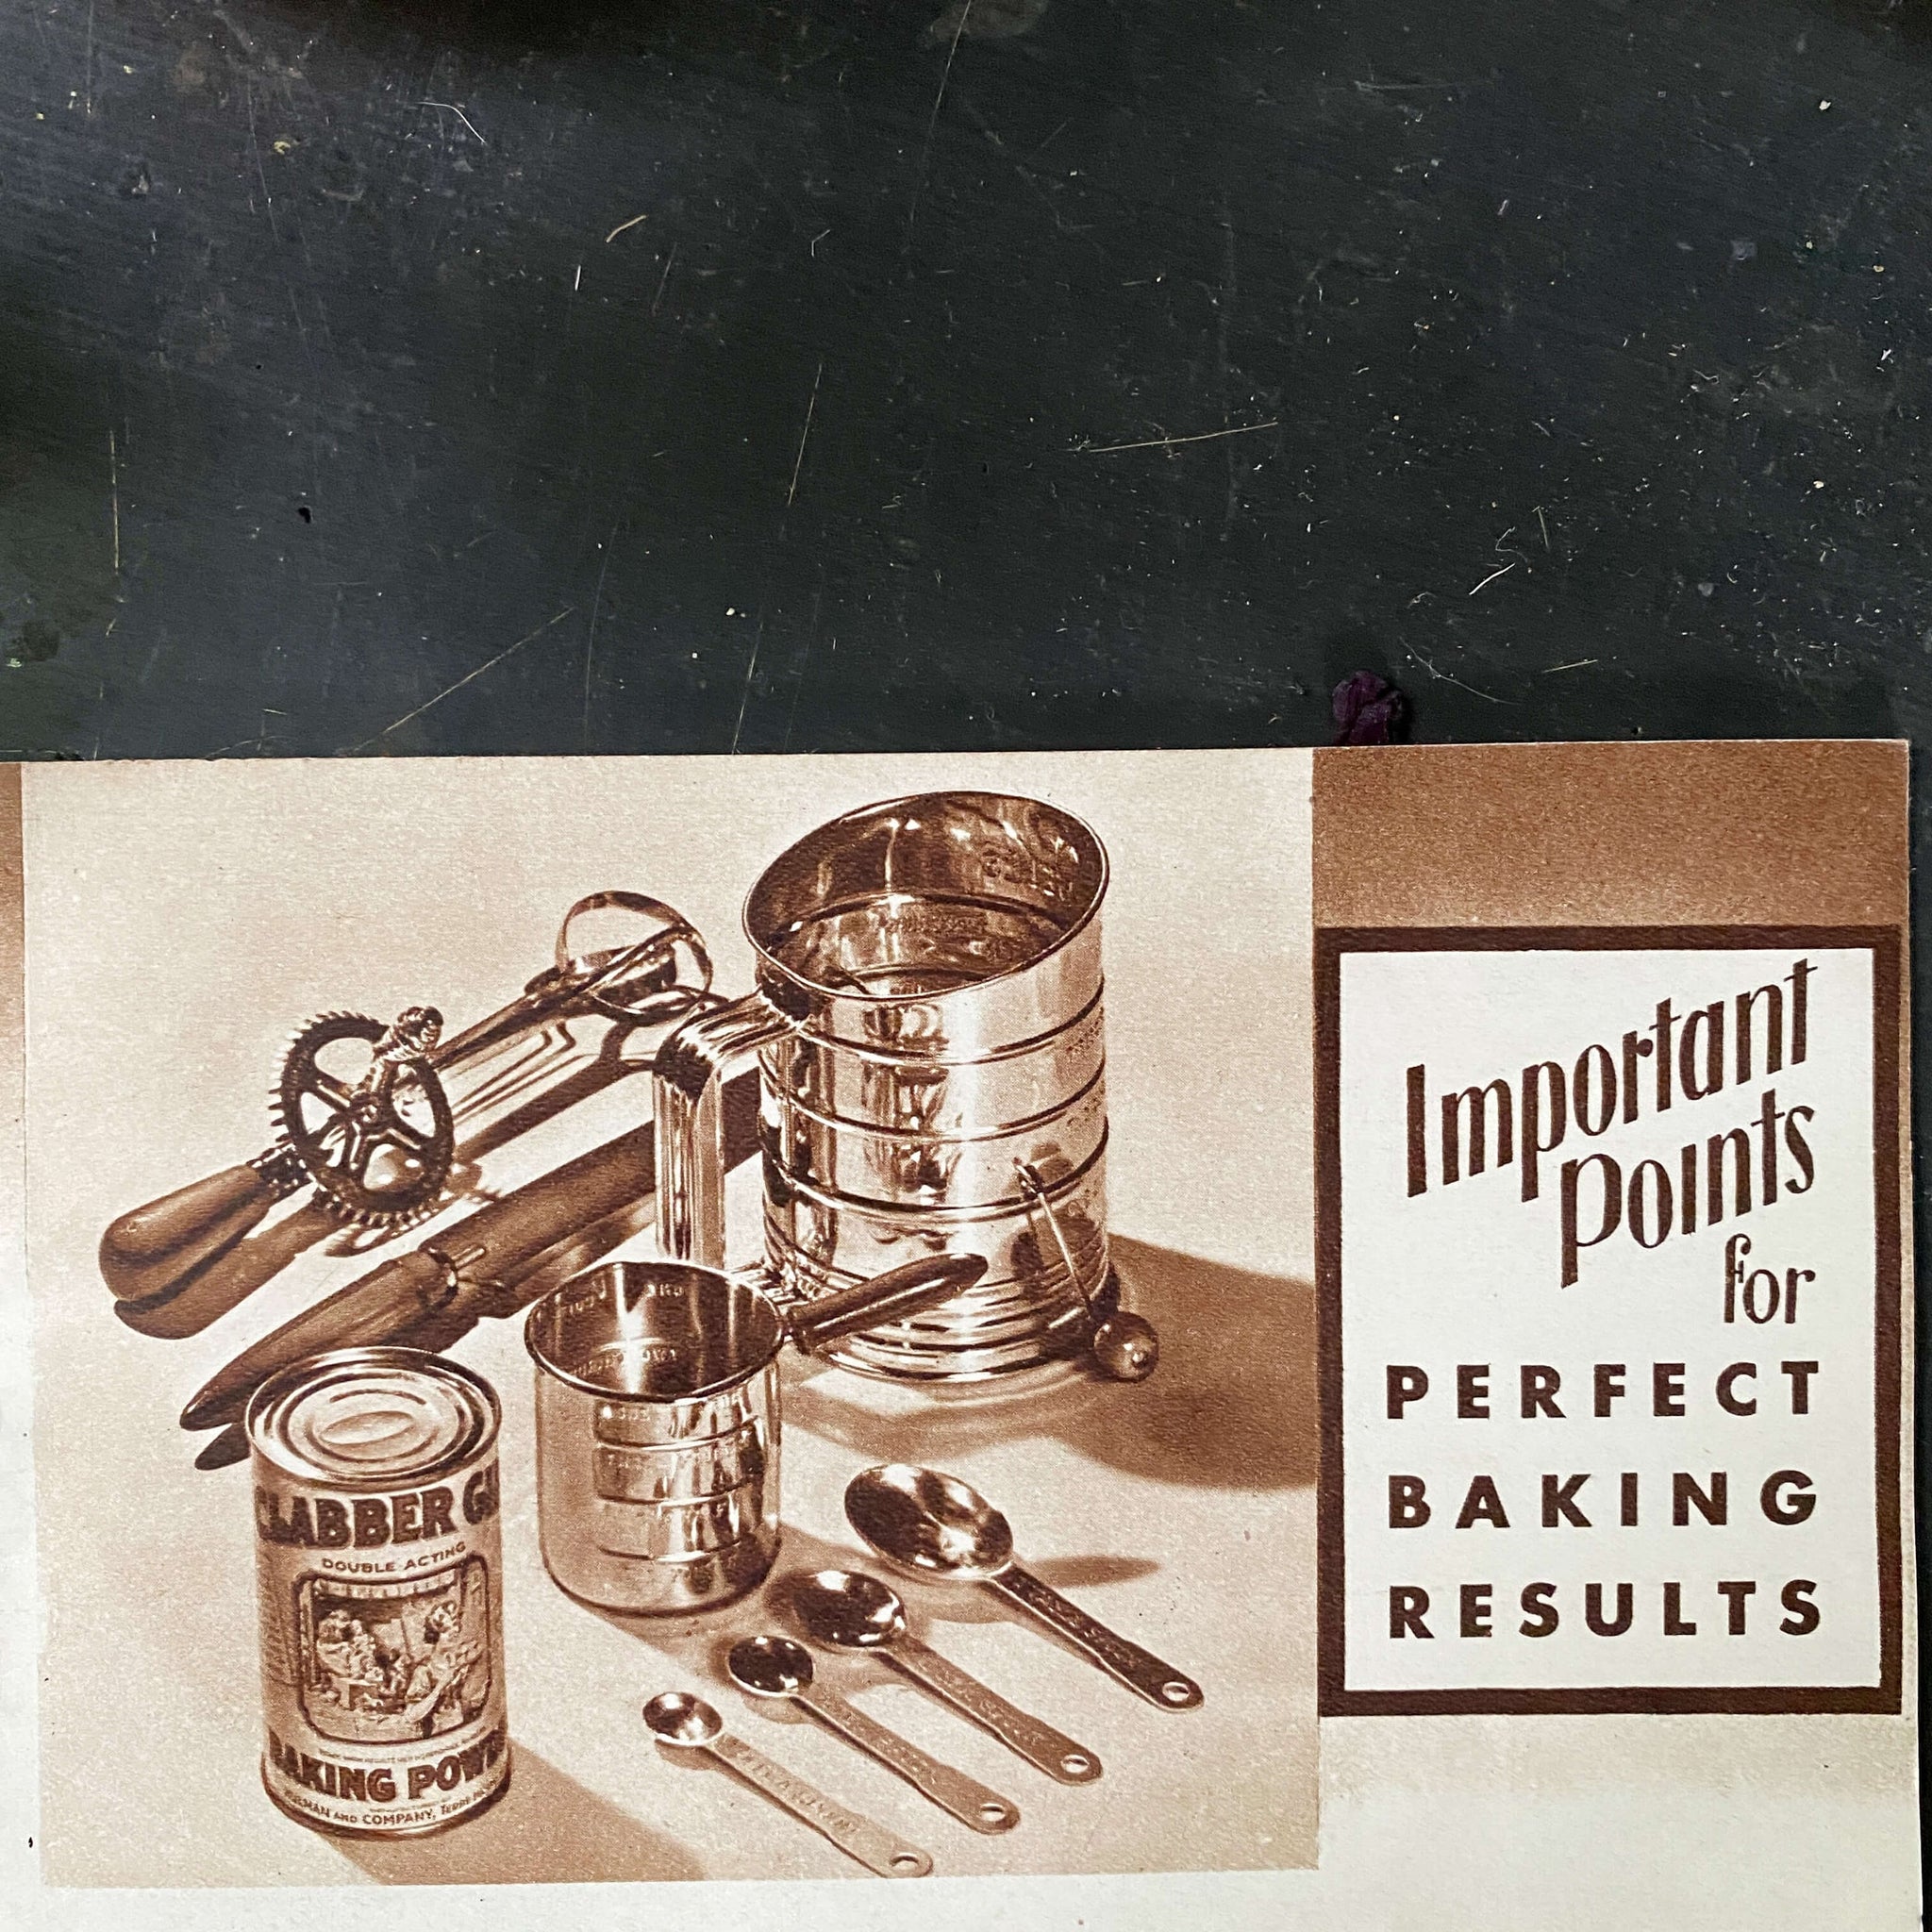 Vintage 1930s Clabber Girl Baking Booklet with Recipes